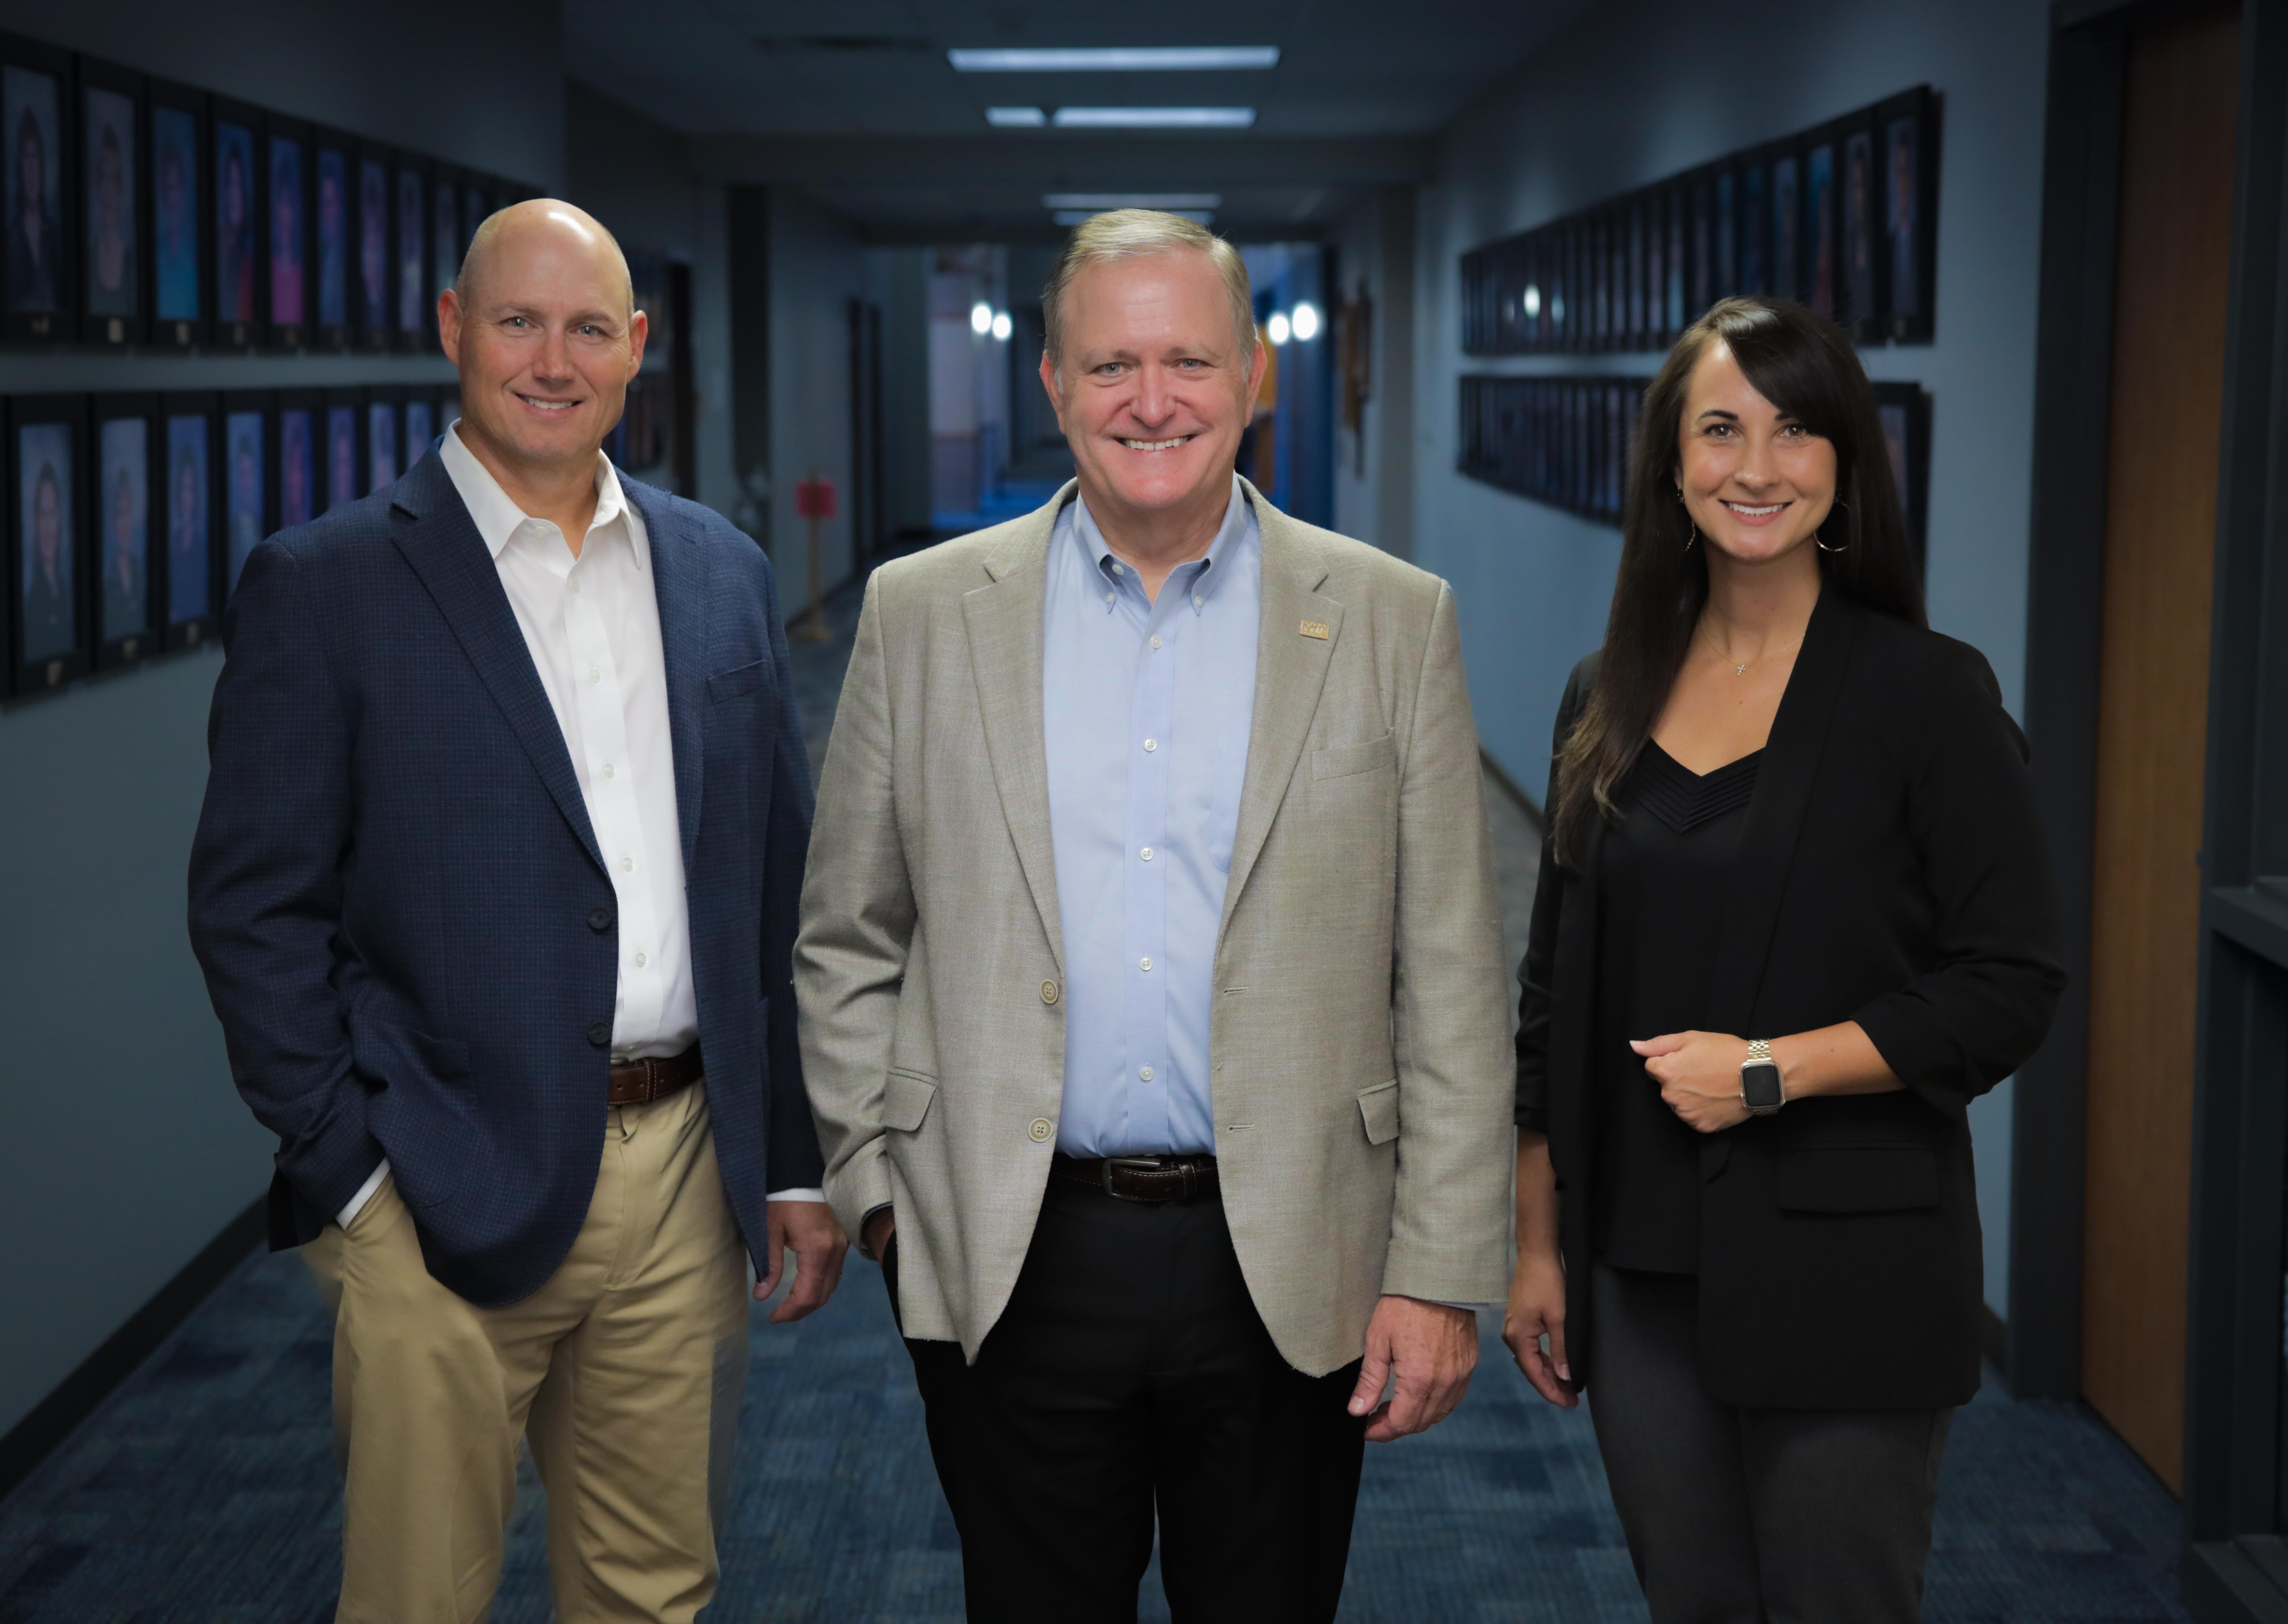 Katy ISD’s Financial Services Earns Excellence Award in Financial Reporting 